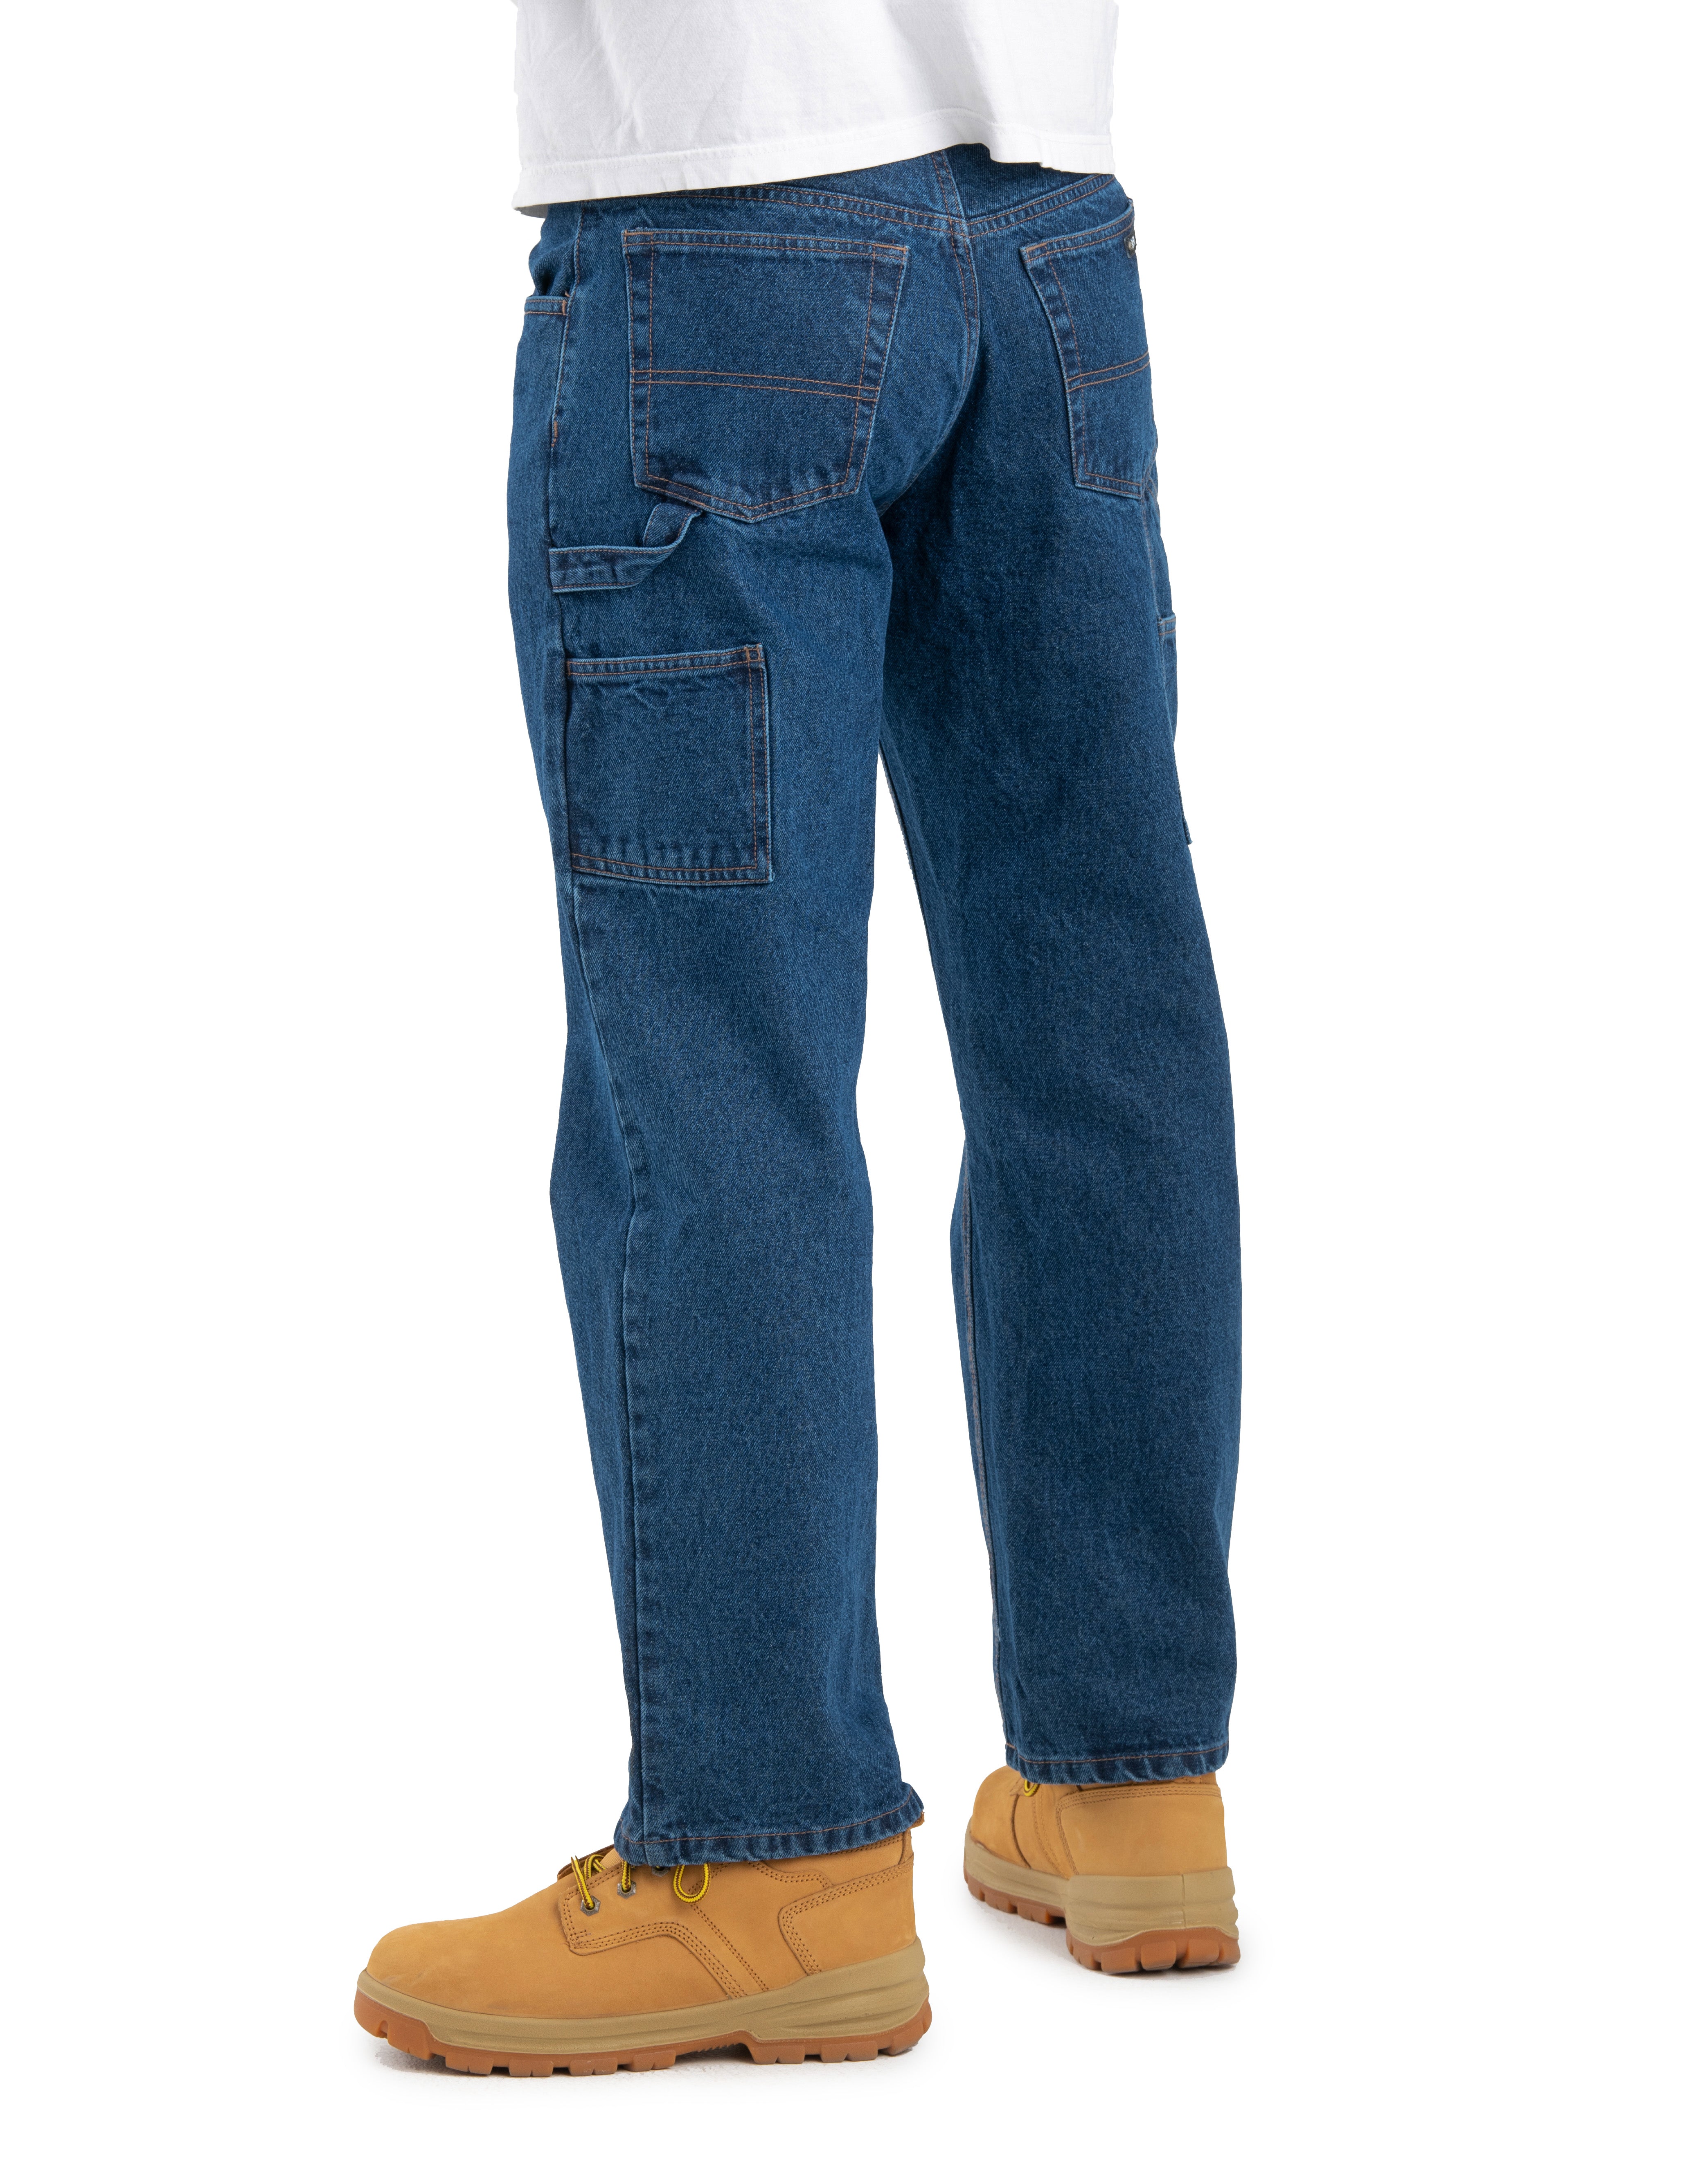 P423CSW Heritage Relaxed Fit Carpenter Jean